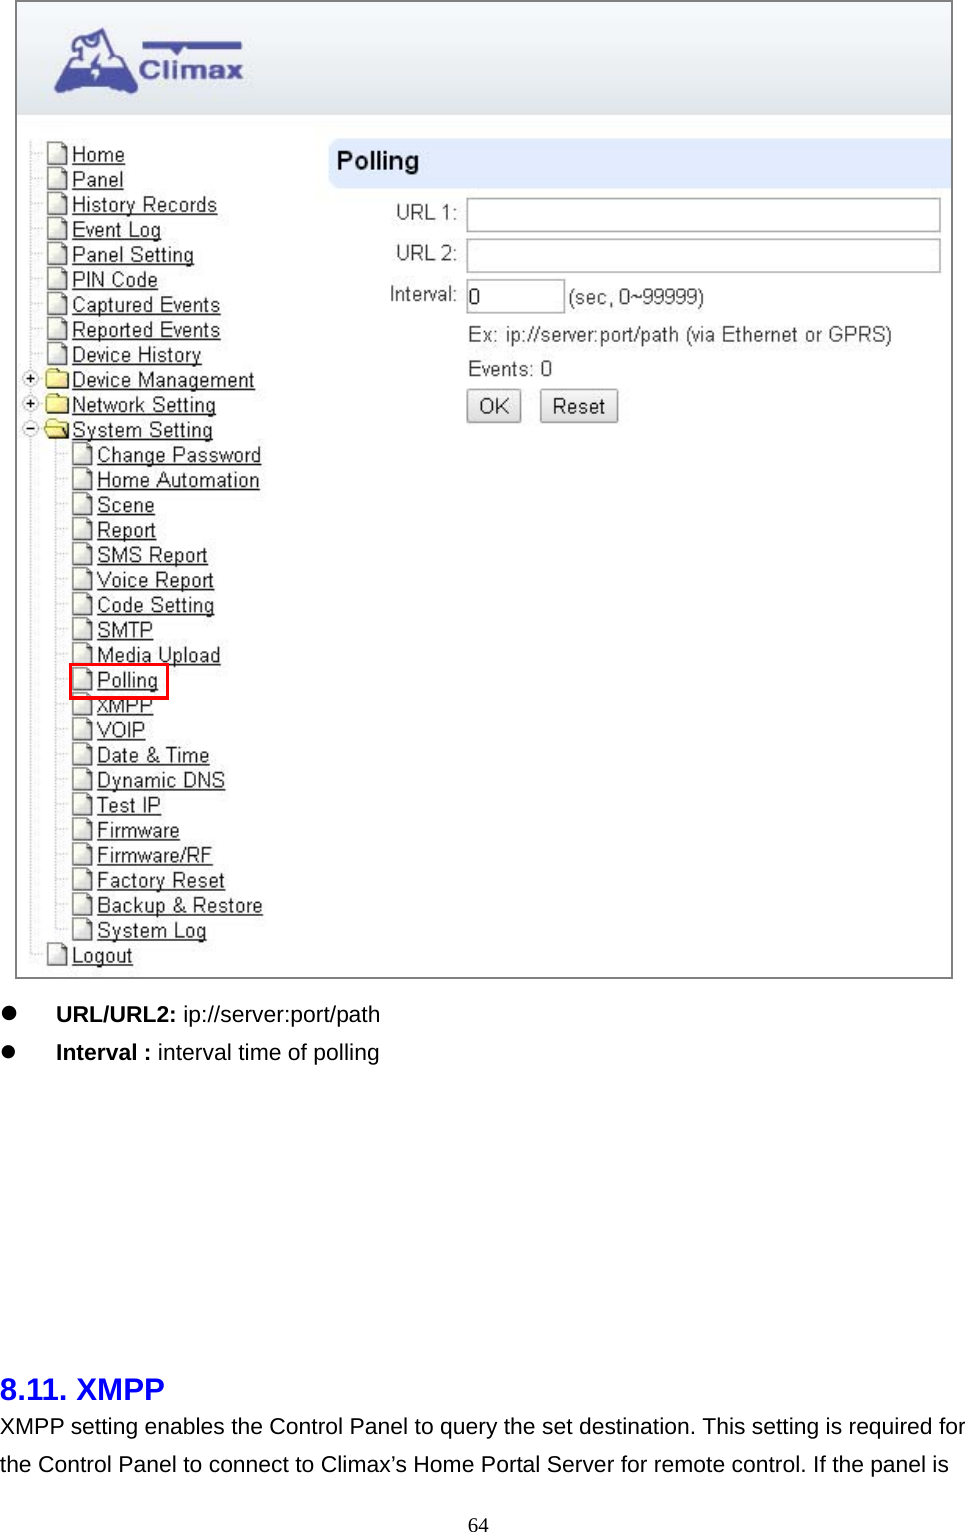  64  URL/URL2: ip://server:port/path      Interval : interval time of polling                8.11. XMPP    XMPP setting enables the Control Panel to query the set destination. This setting is required for the Control Panel to connect to Climax’s Home Portal Server for remote control. If the panel is 